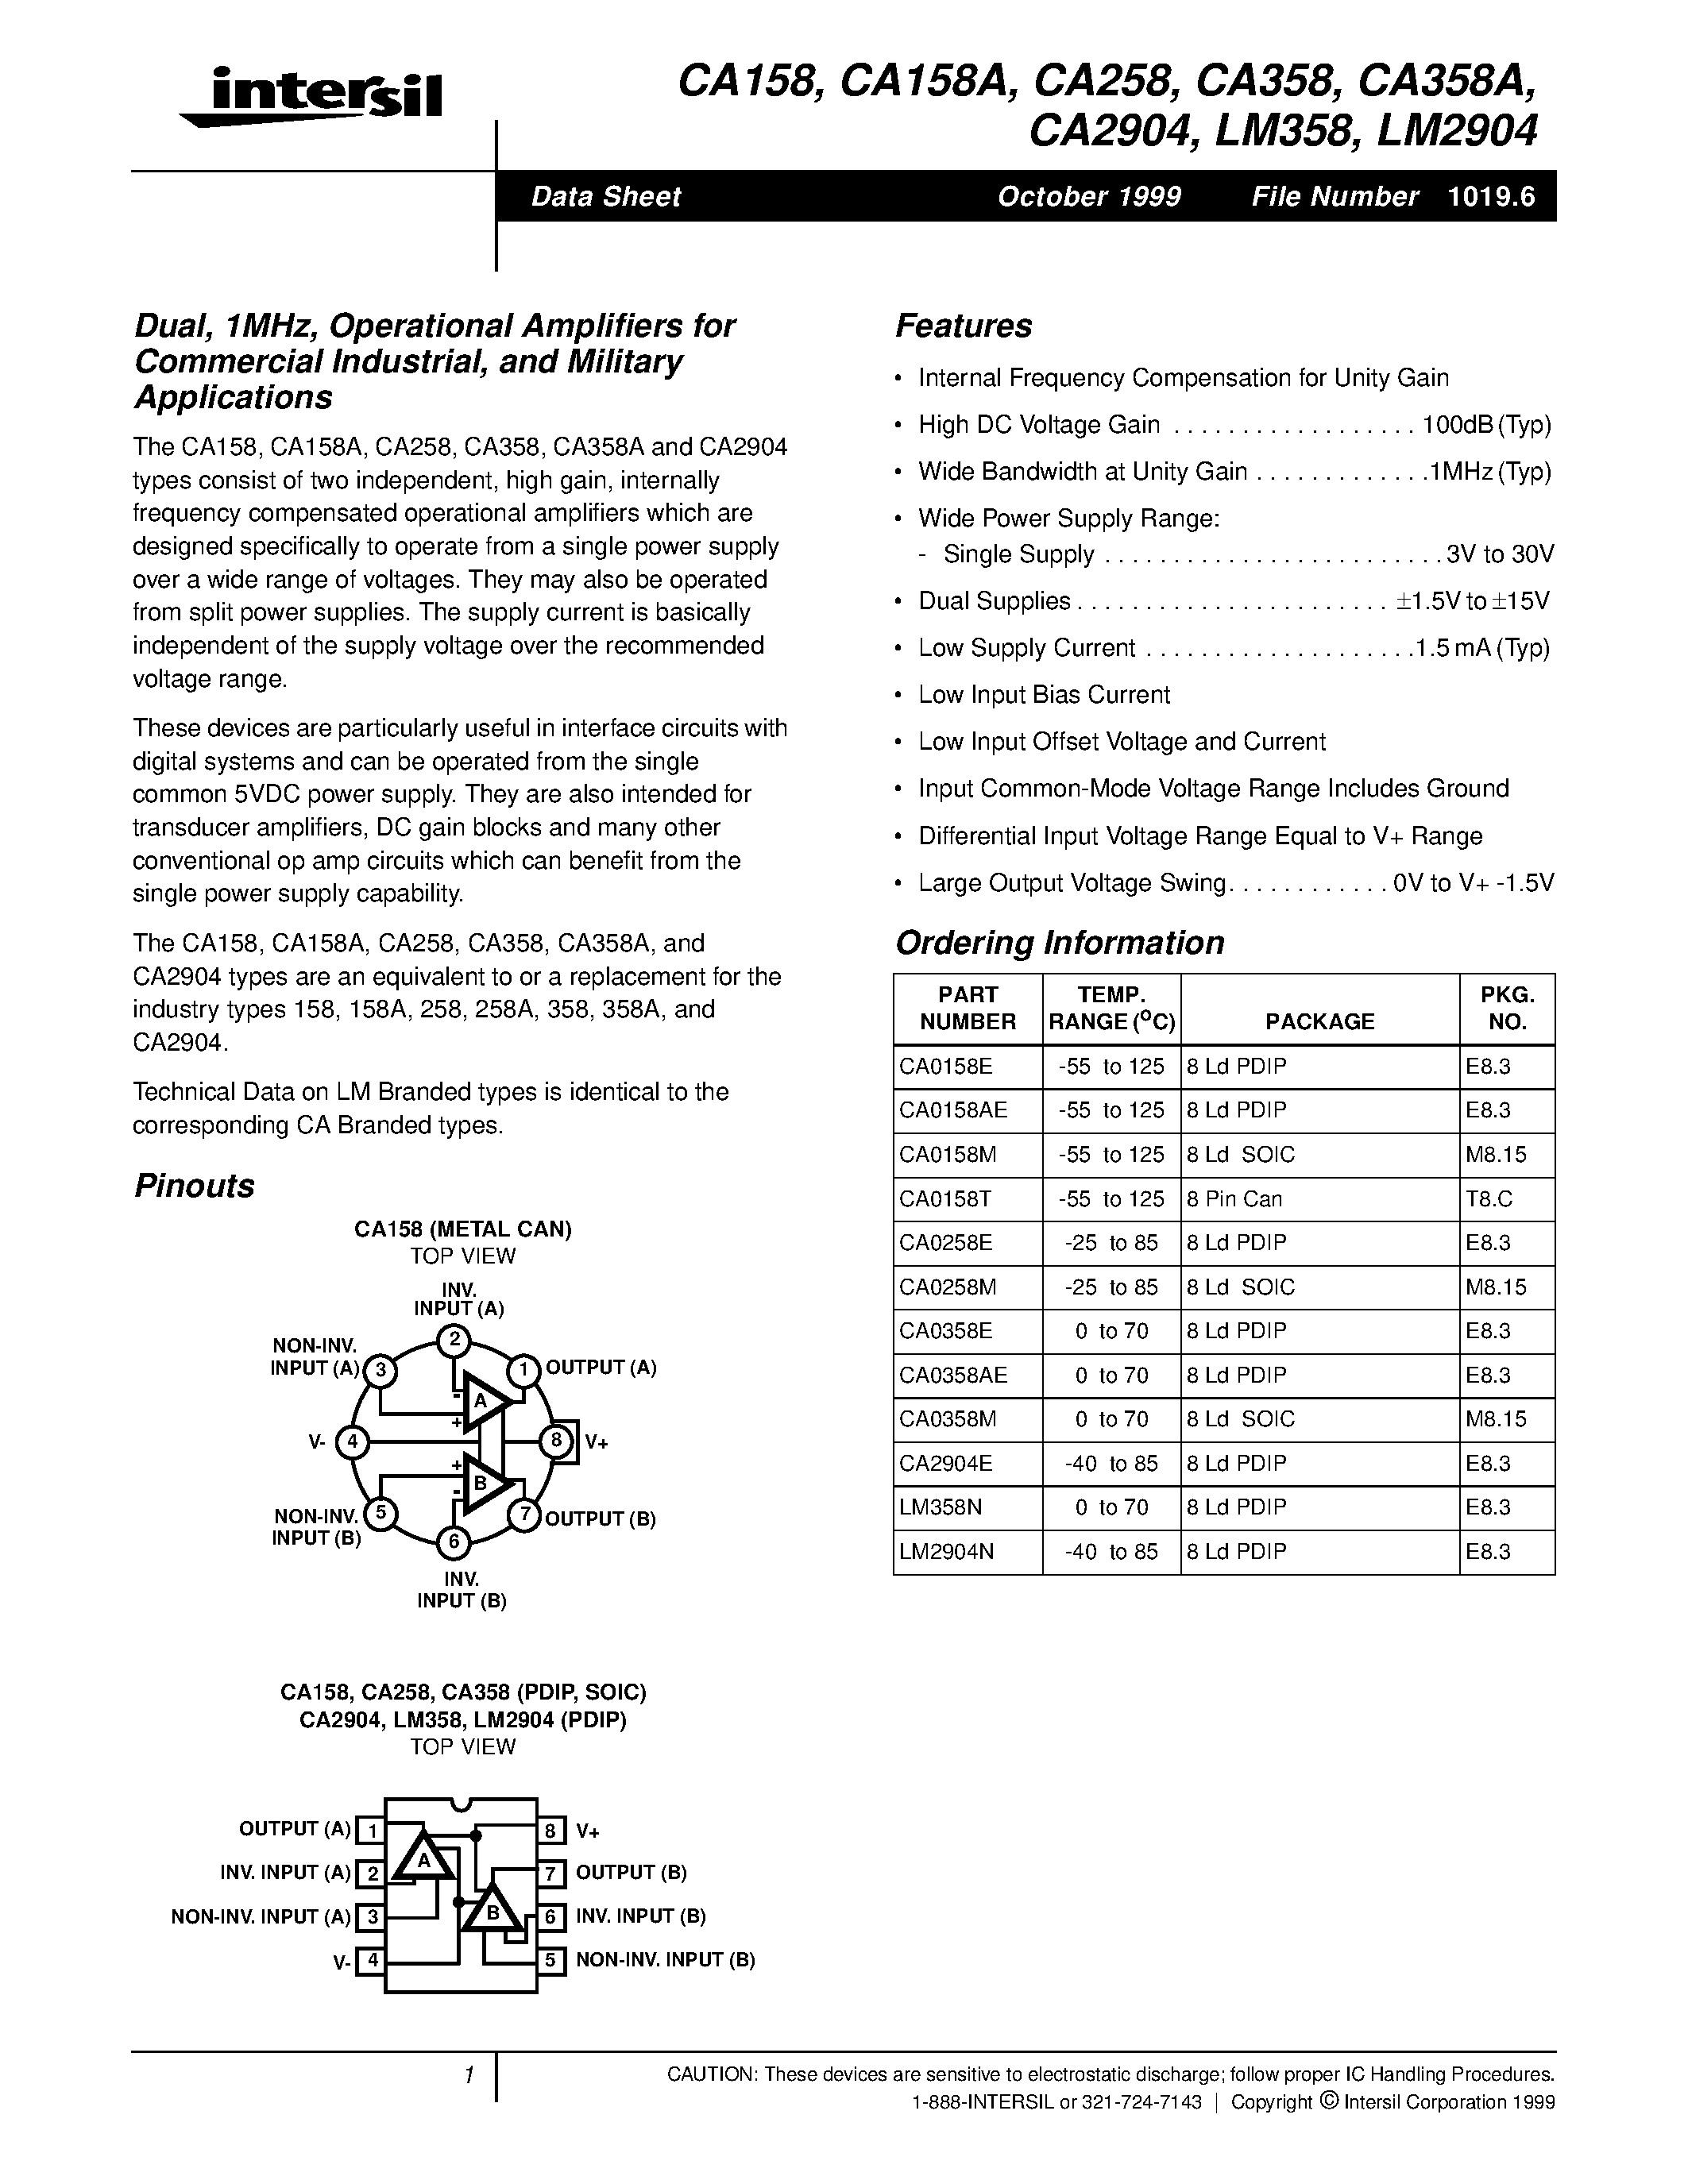 Datasheet CA2904 - Operational Amplifiers page 1